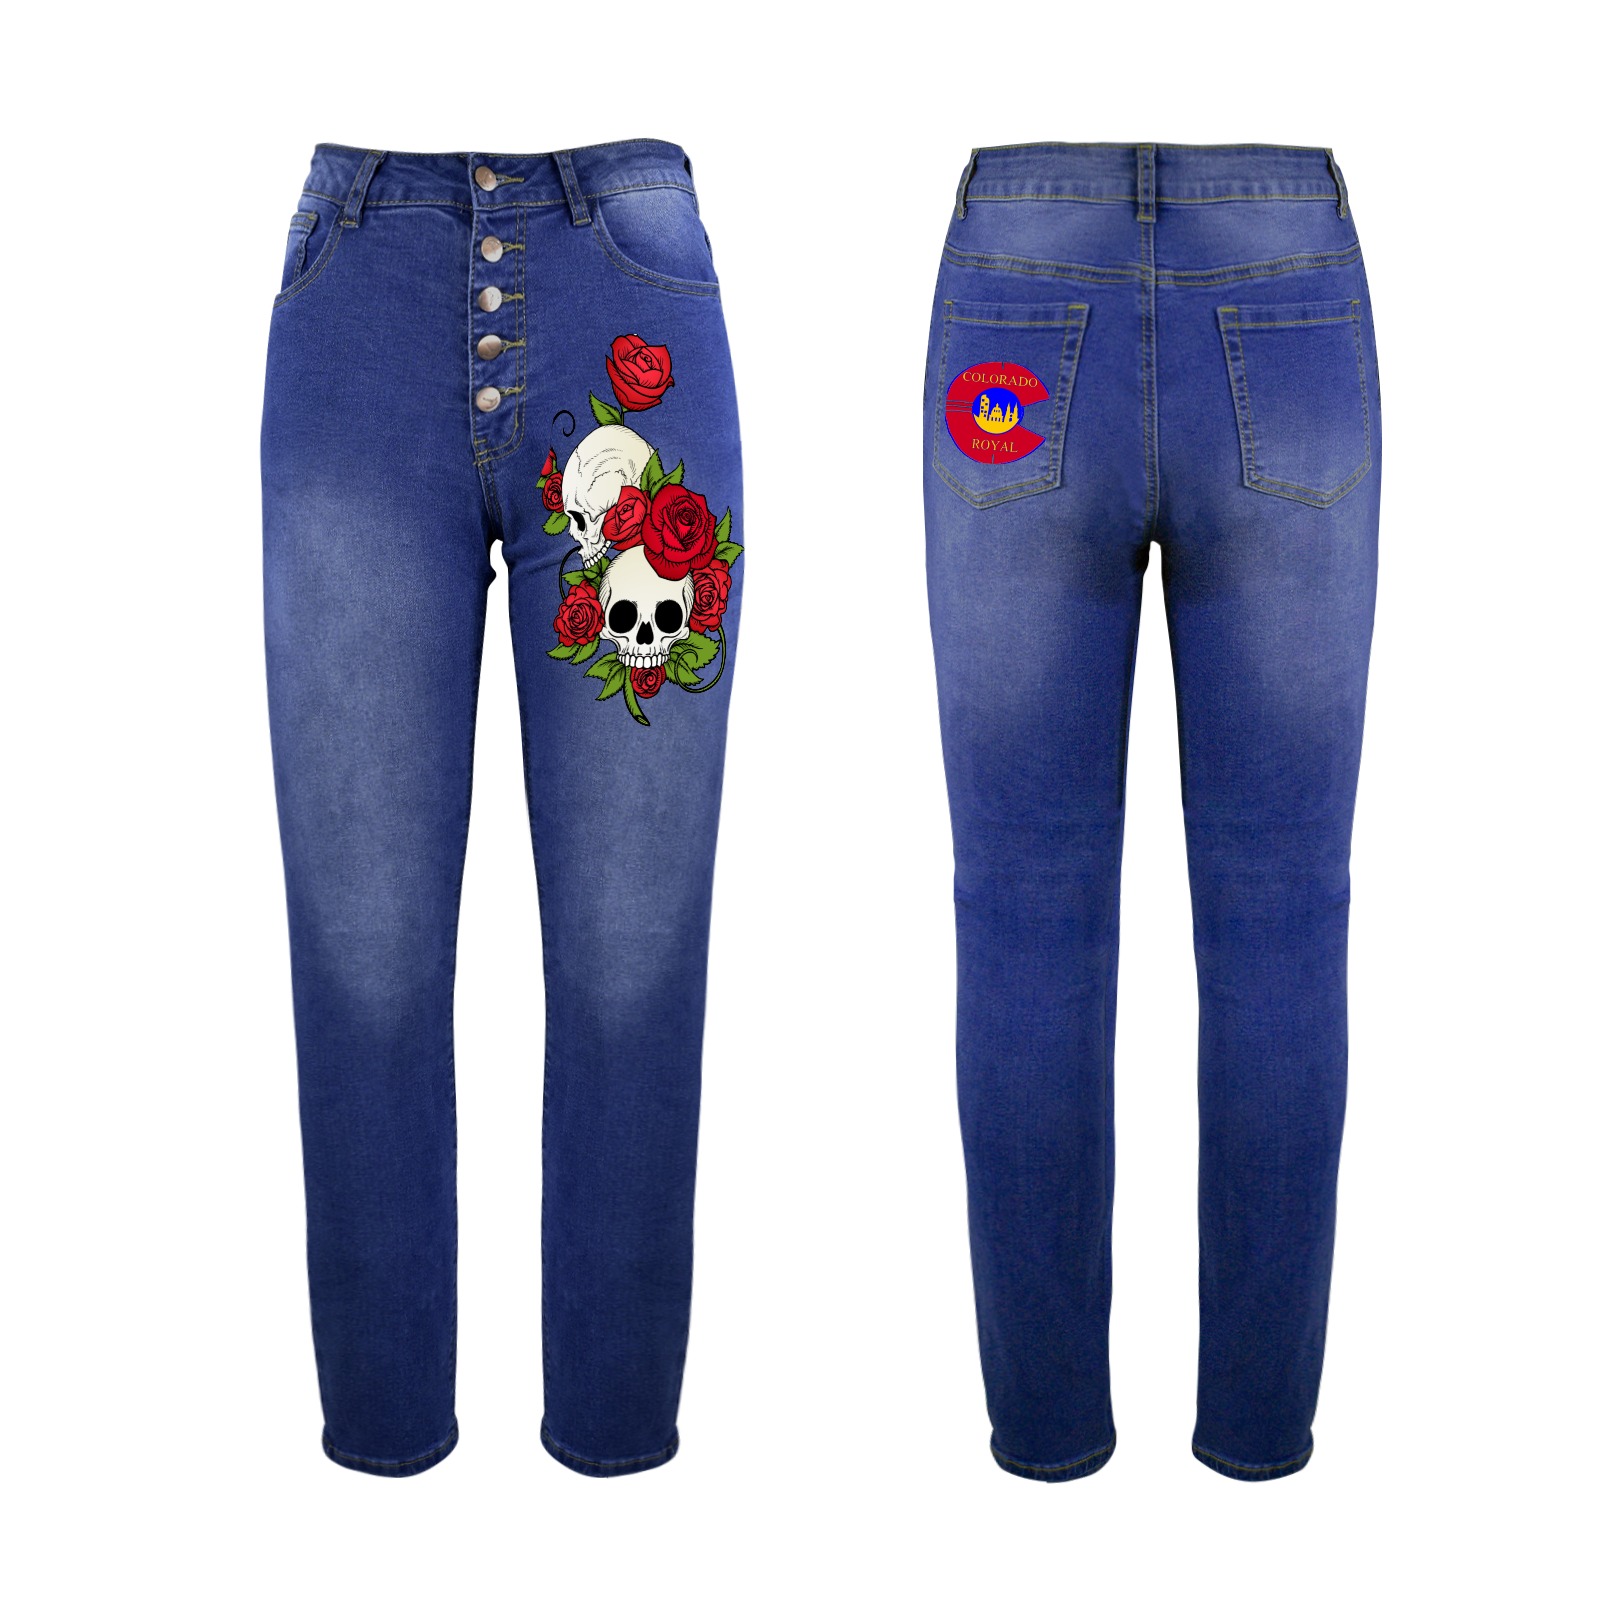 Skully Rose Colorado Royal Women's Jeans (Front&Back Printing)